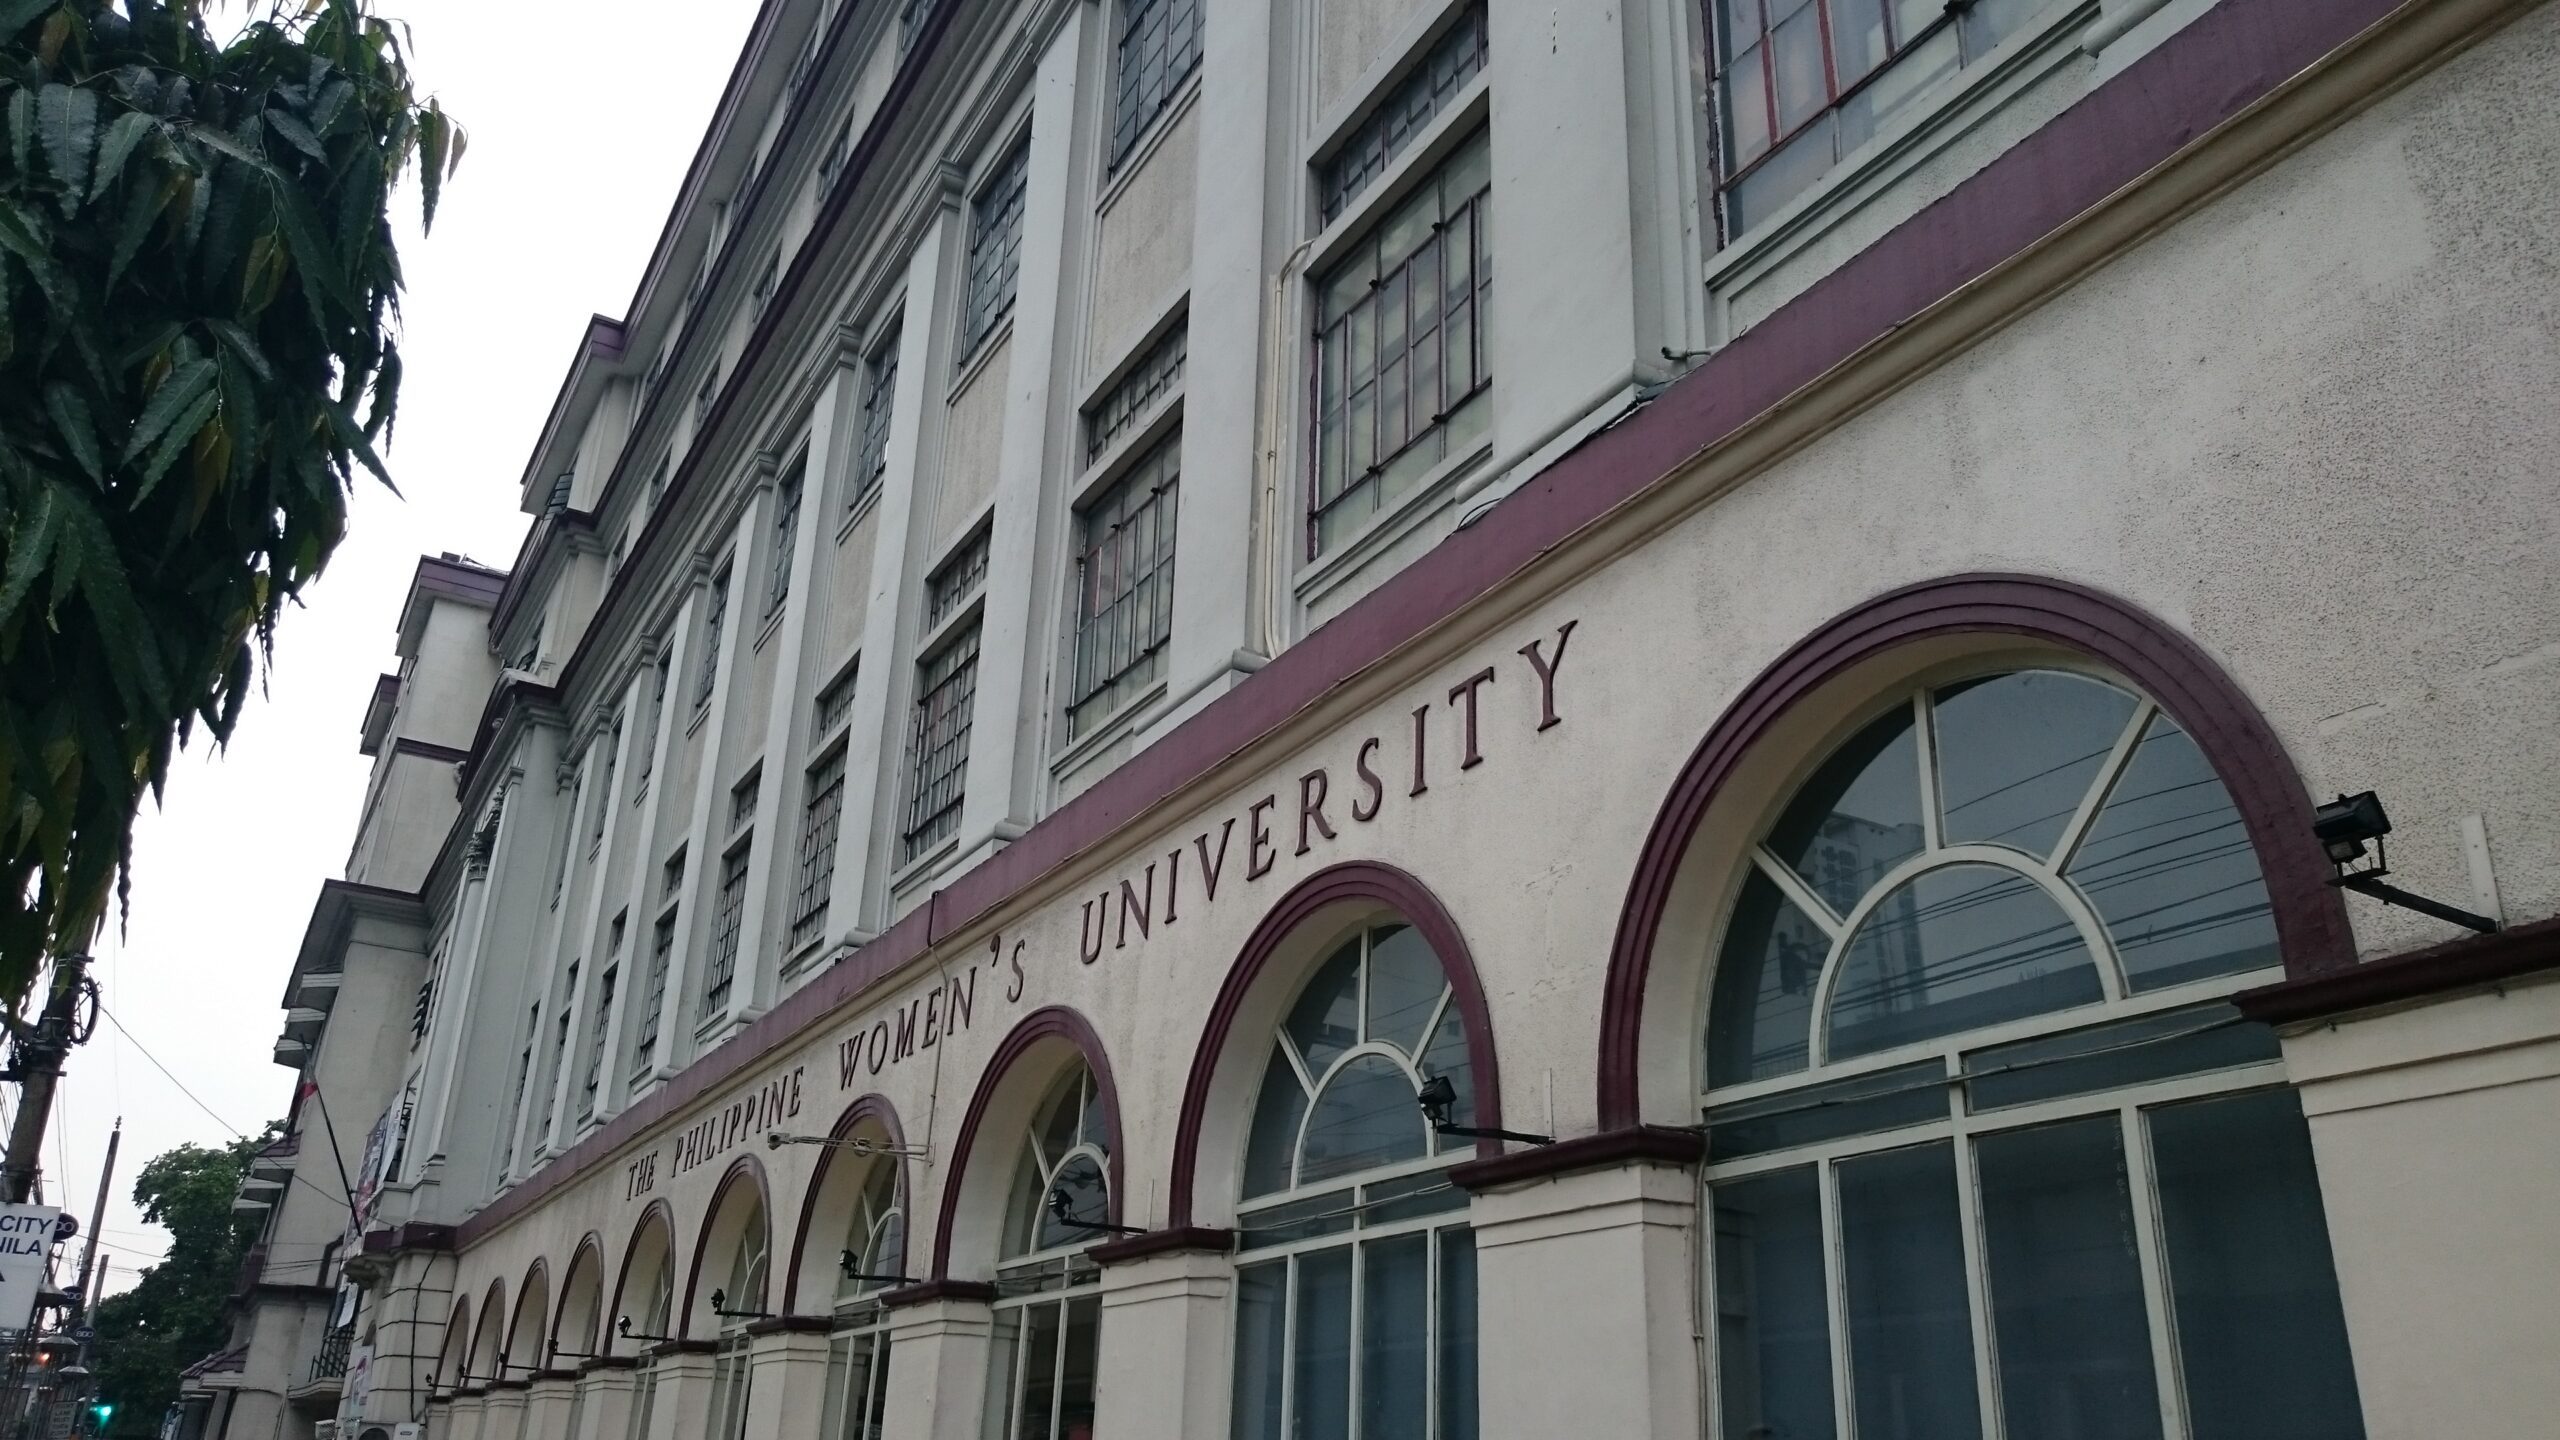 PWU undergoing rehabilitation, foreclosures stopped for now